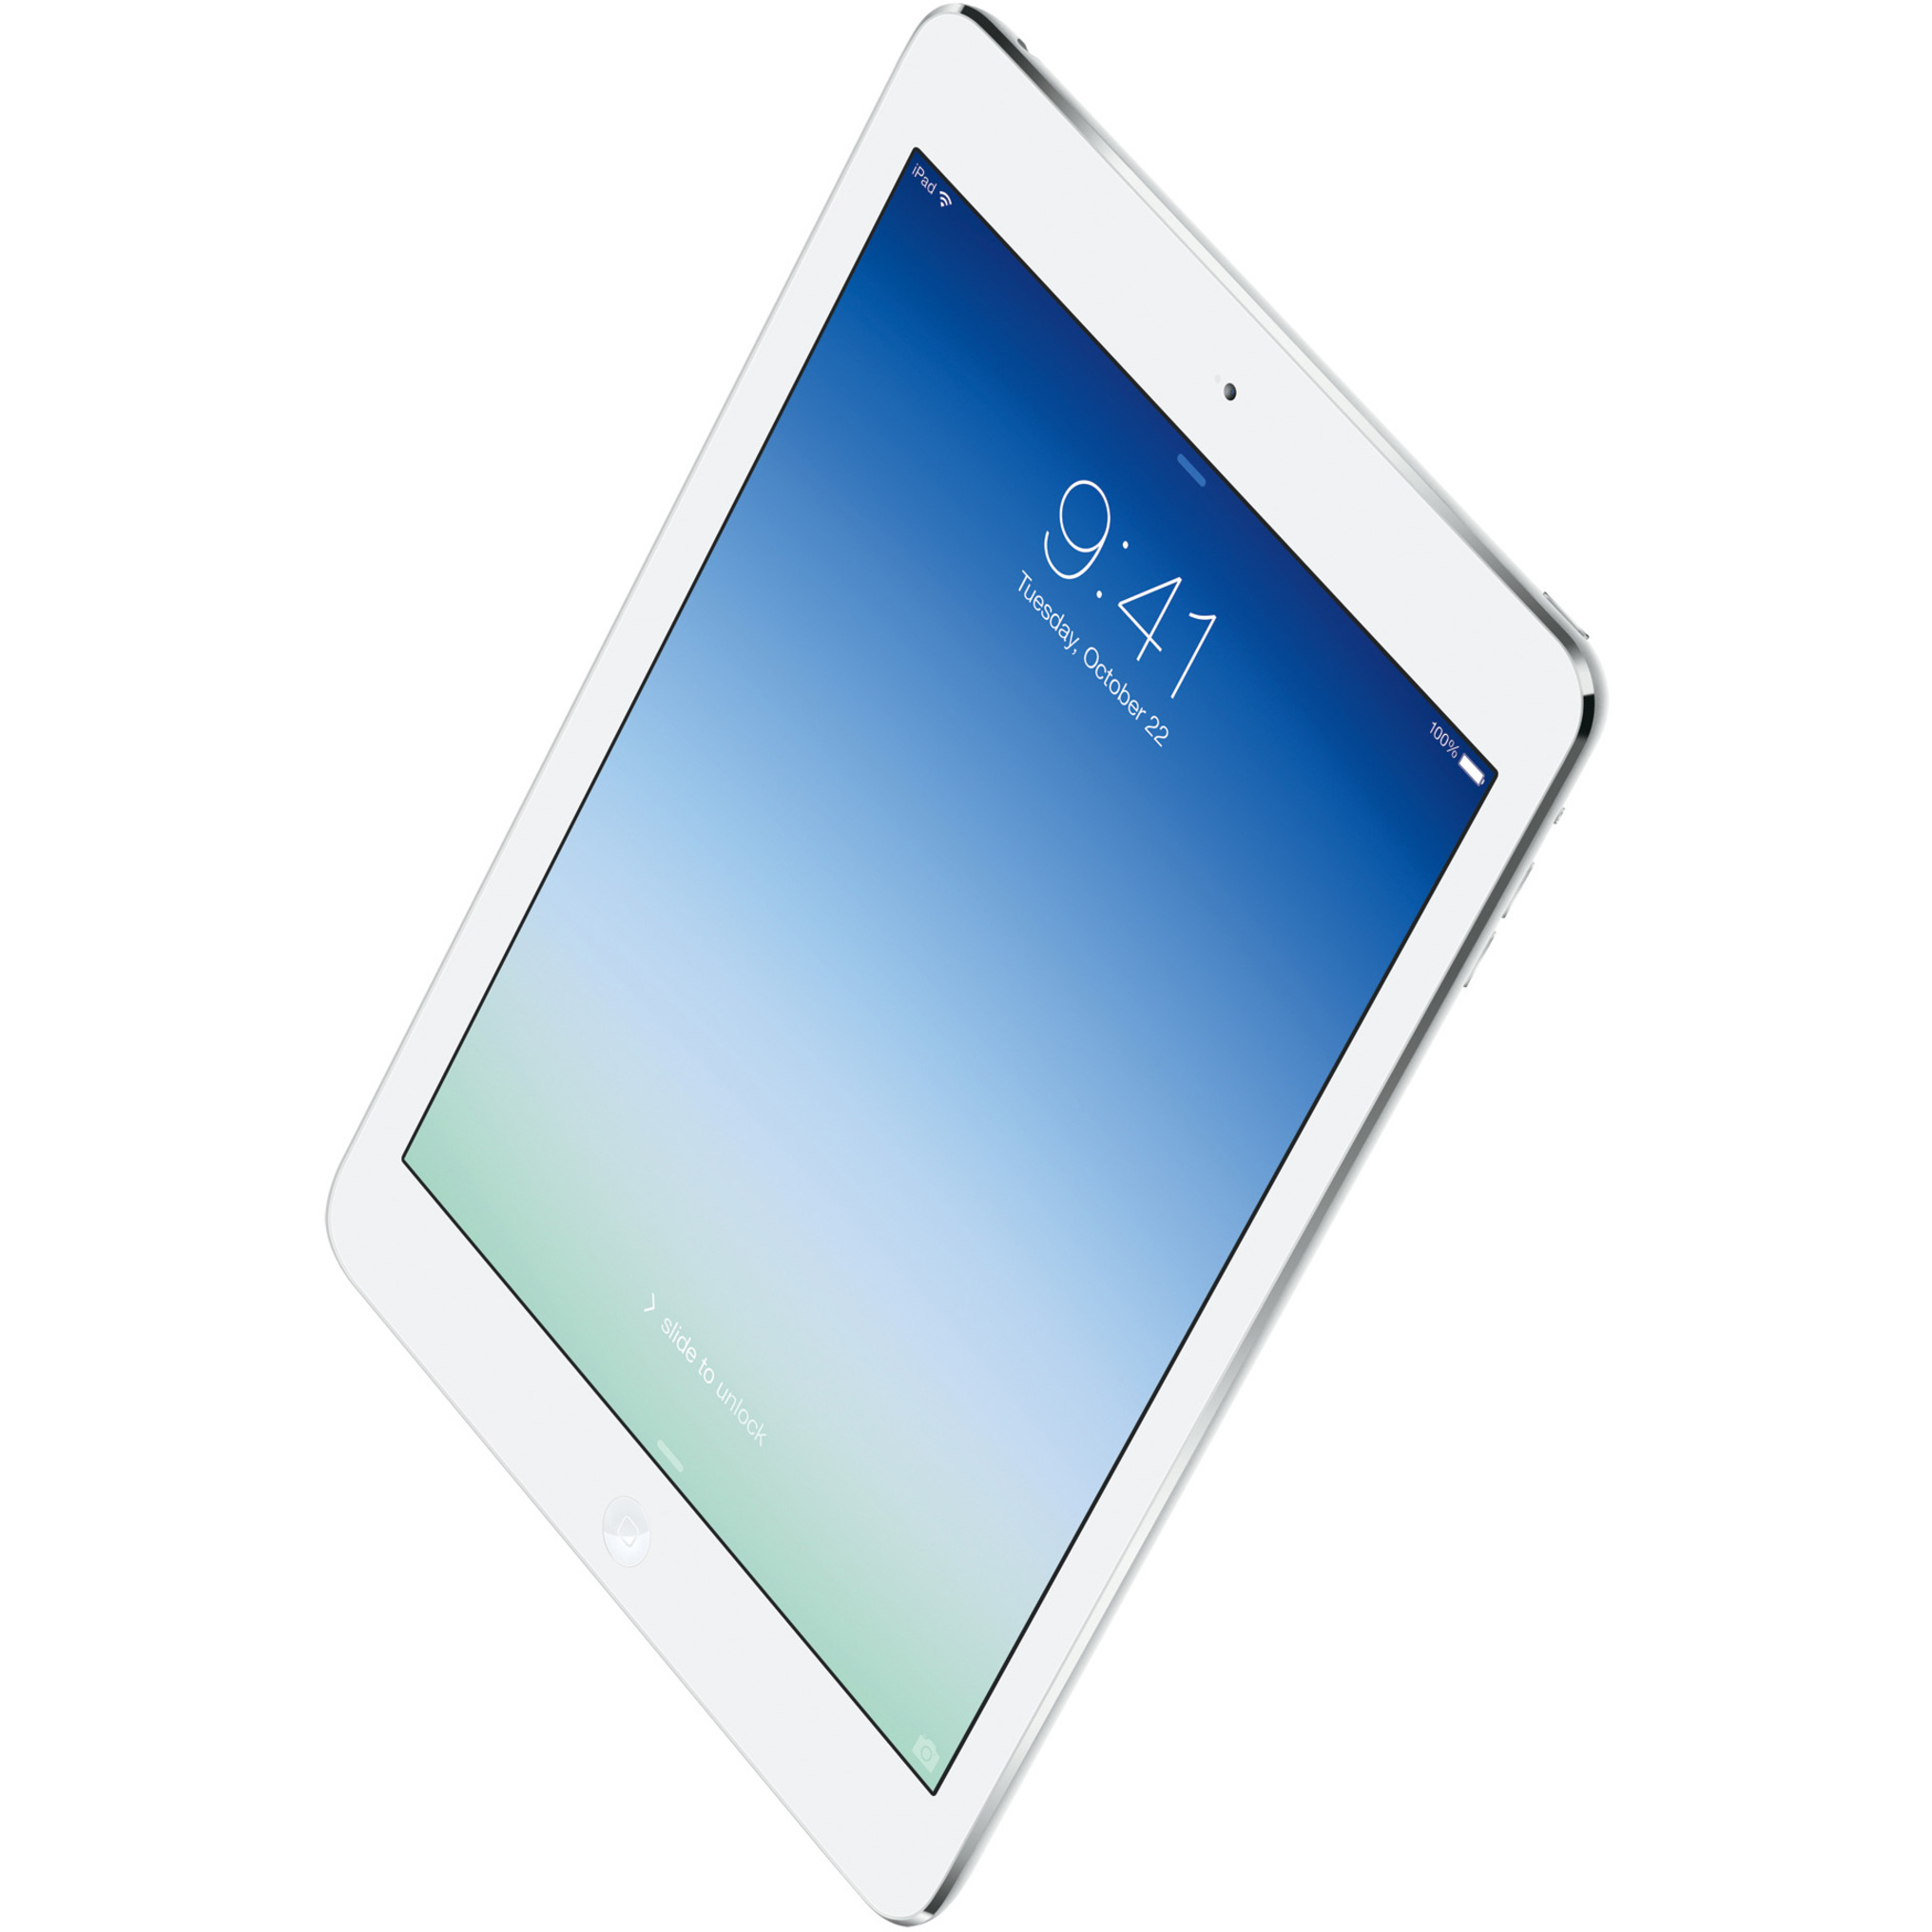 Apple iPad Air MF021LL/A Tablet, 9.7" QXGA, Cyclone Dual-core (2 Core) 1.30 GHz, 16 GB Storage, iOS 7, Silver - image 1 of 6